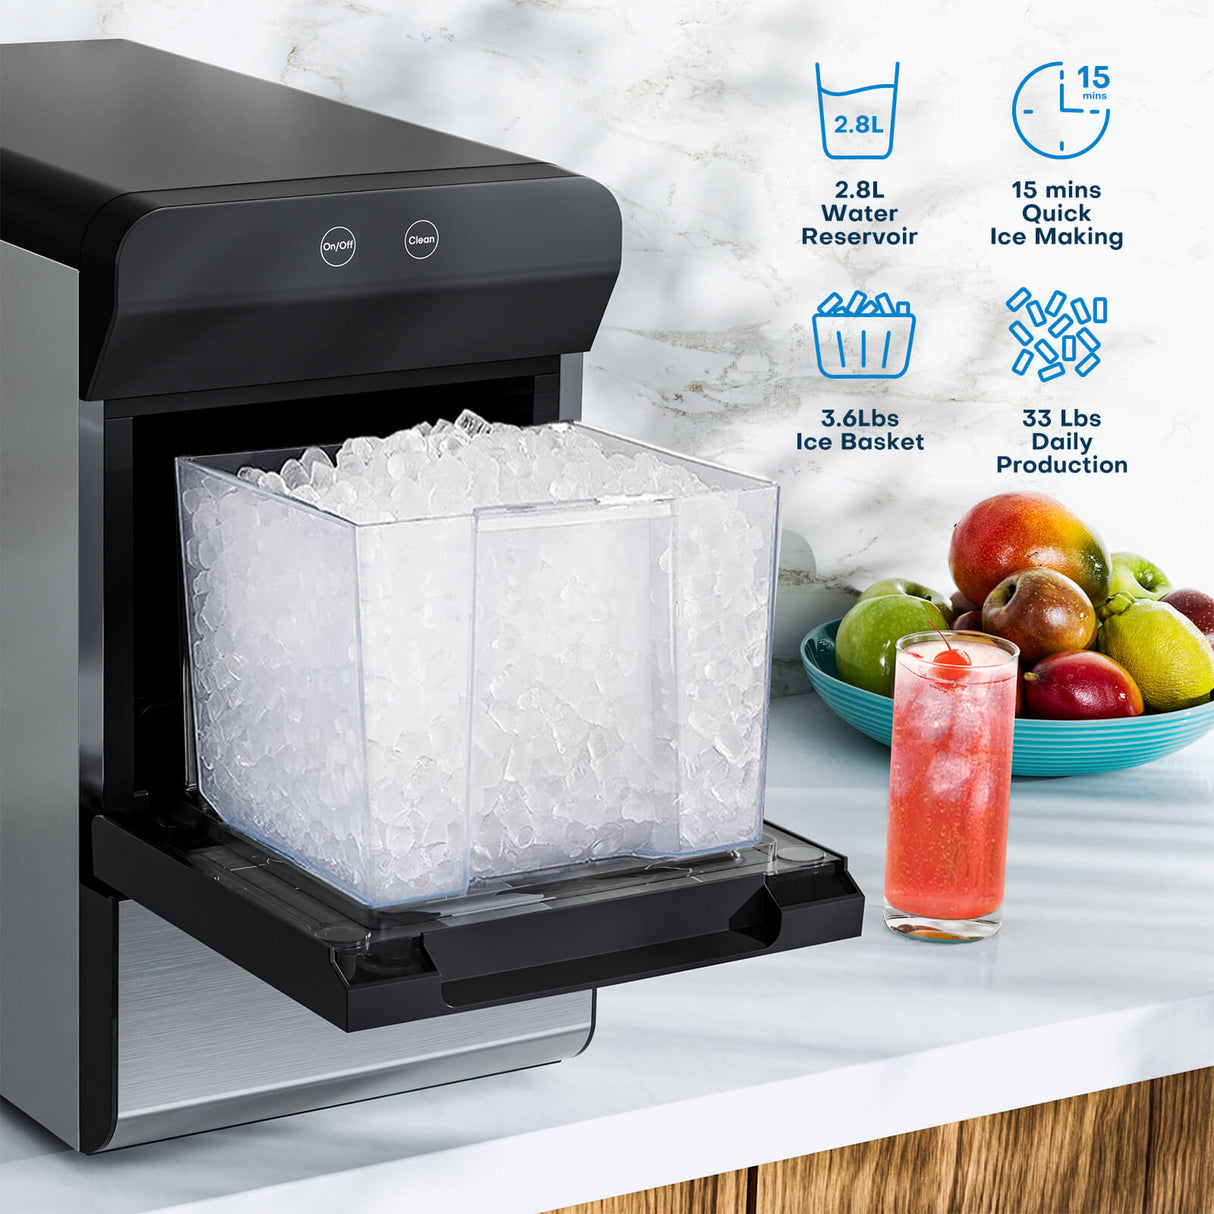  Upstreman Y90 Countertop Ice Maker, Self-Cleaning Ice Cube  Maker Machine, Max 26Lbs/Day, 9 Ice Cubes Ready in 6 Mins, Portable Bullet Ice  Maker for Home, Kitchen, Office, Party : Appliances